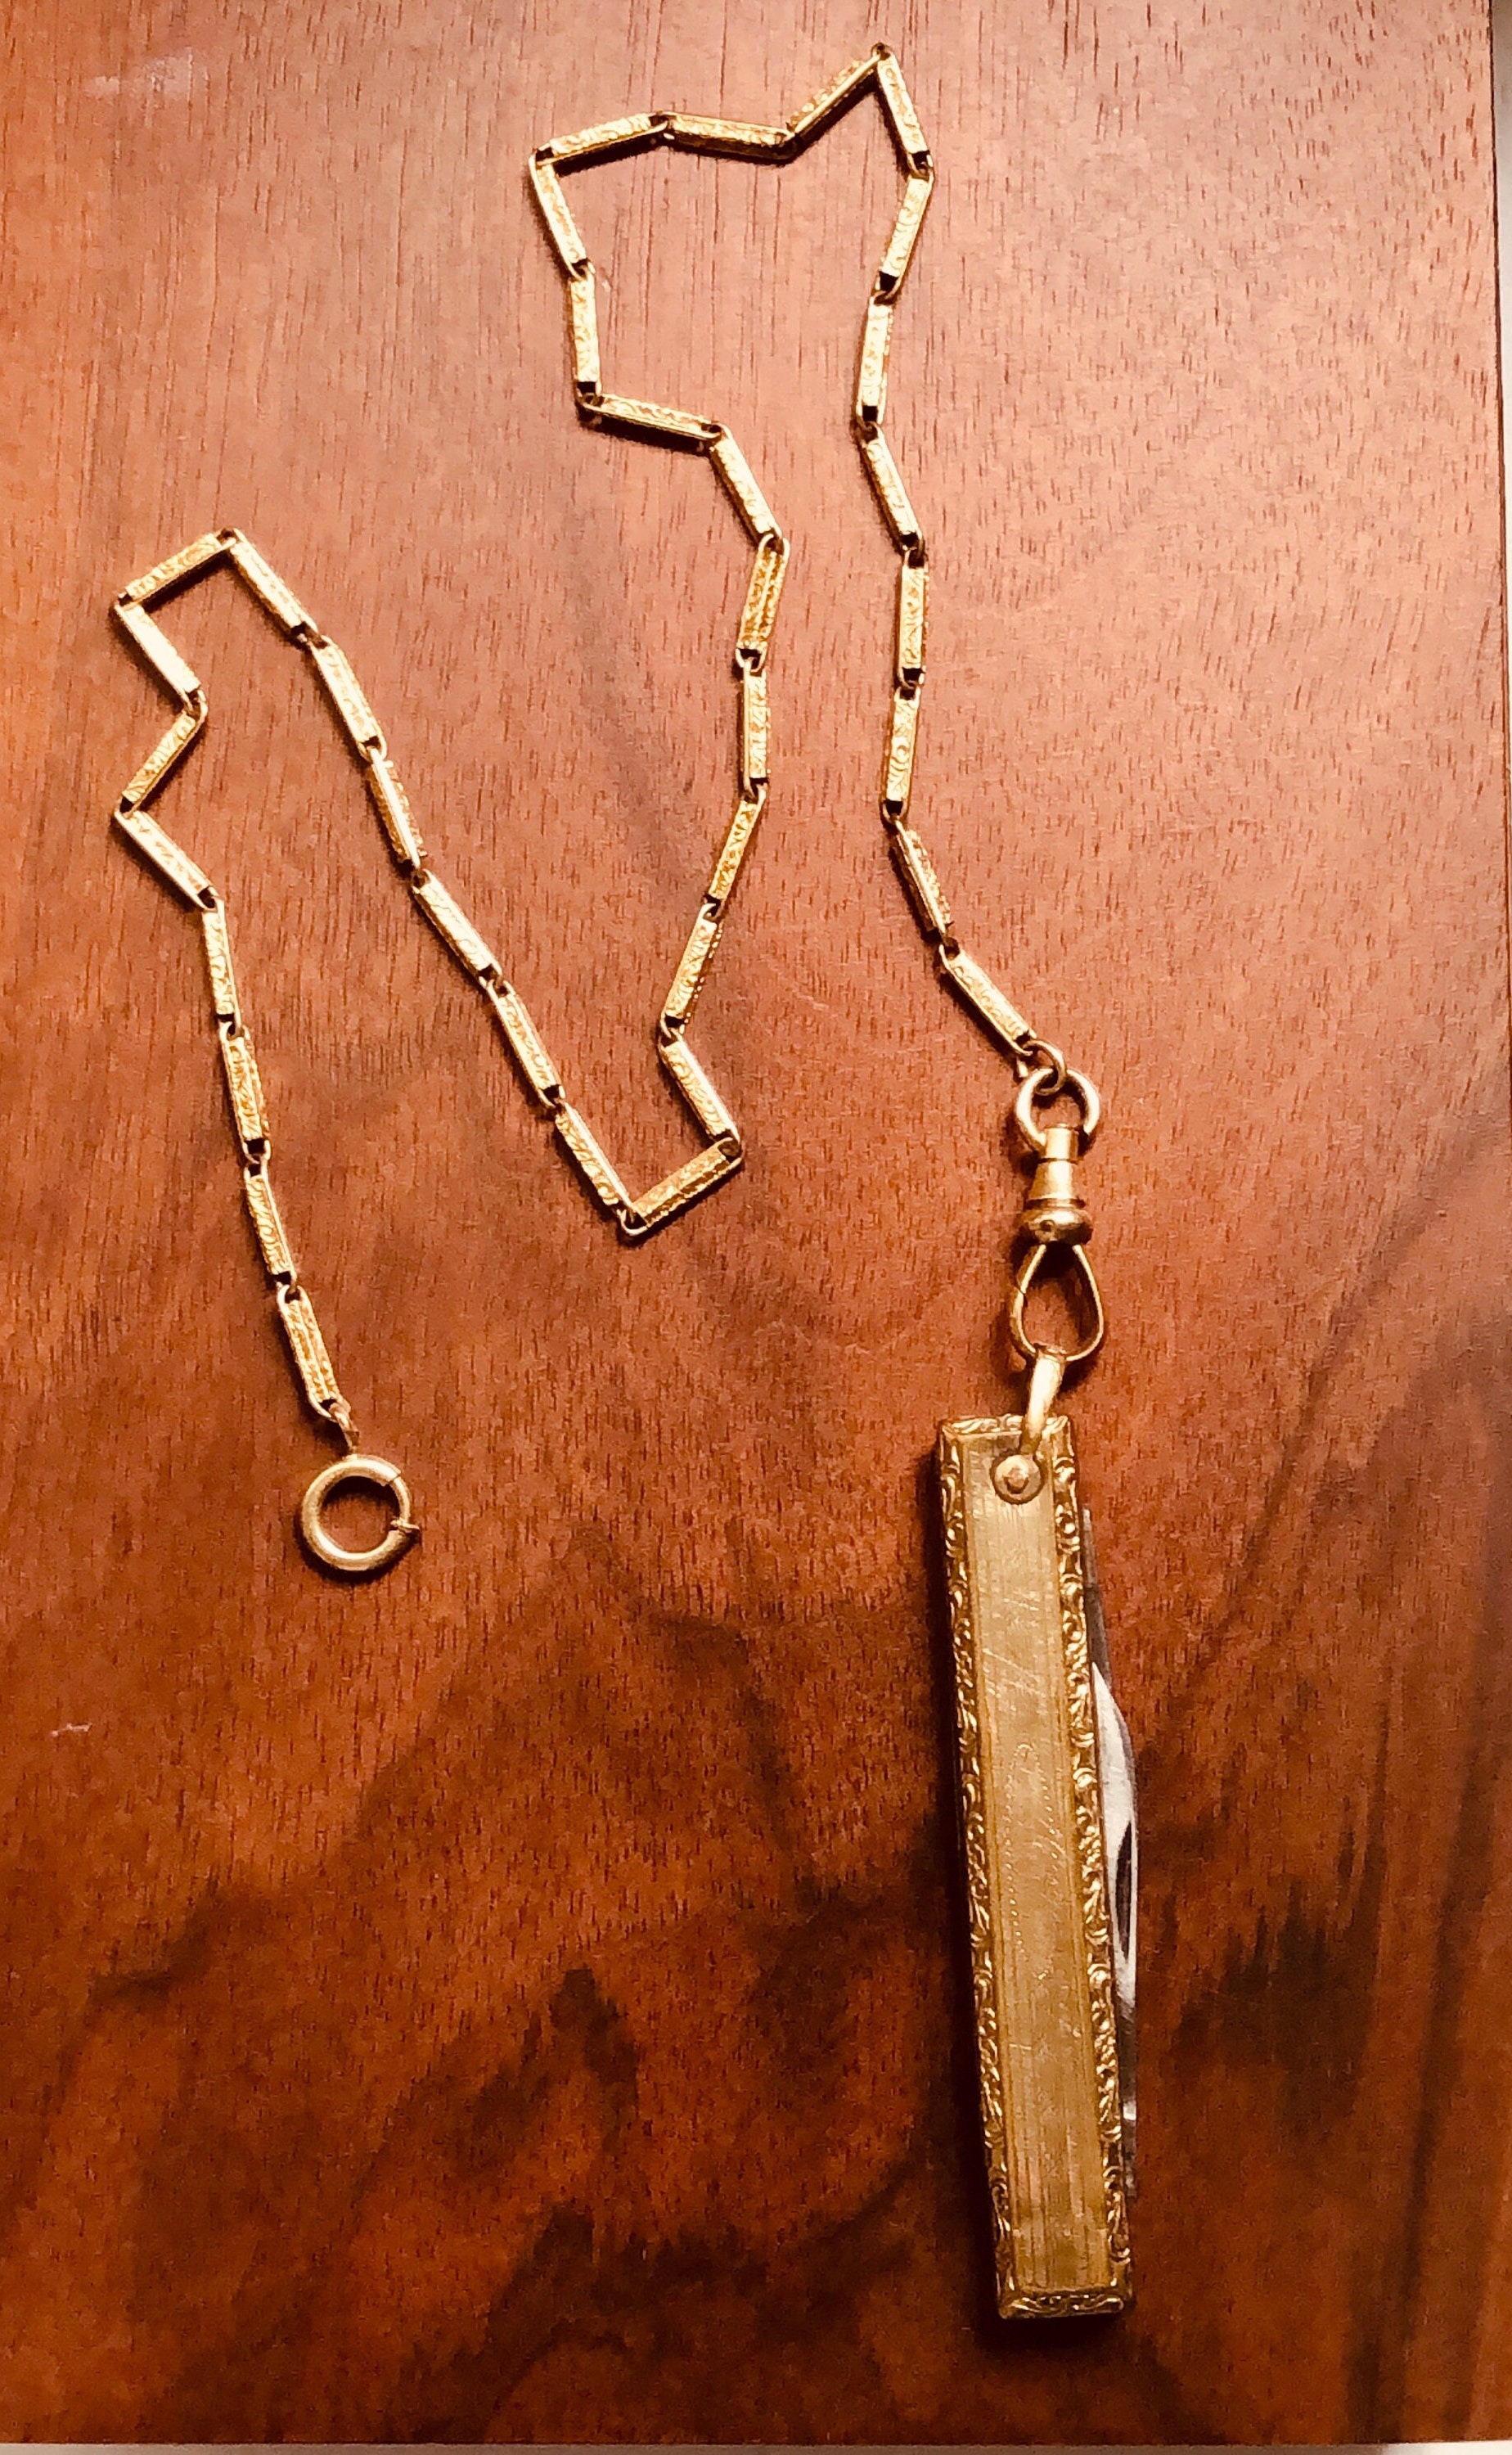 Antique 15ct gold watch chain, dog clip and bolt ring clasp, c1900